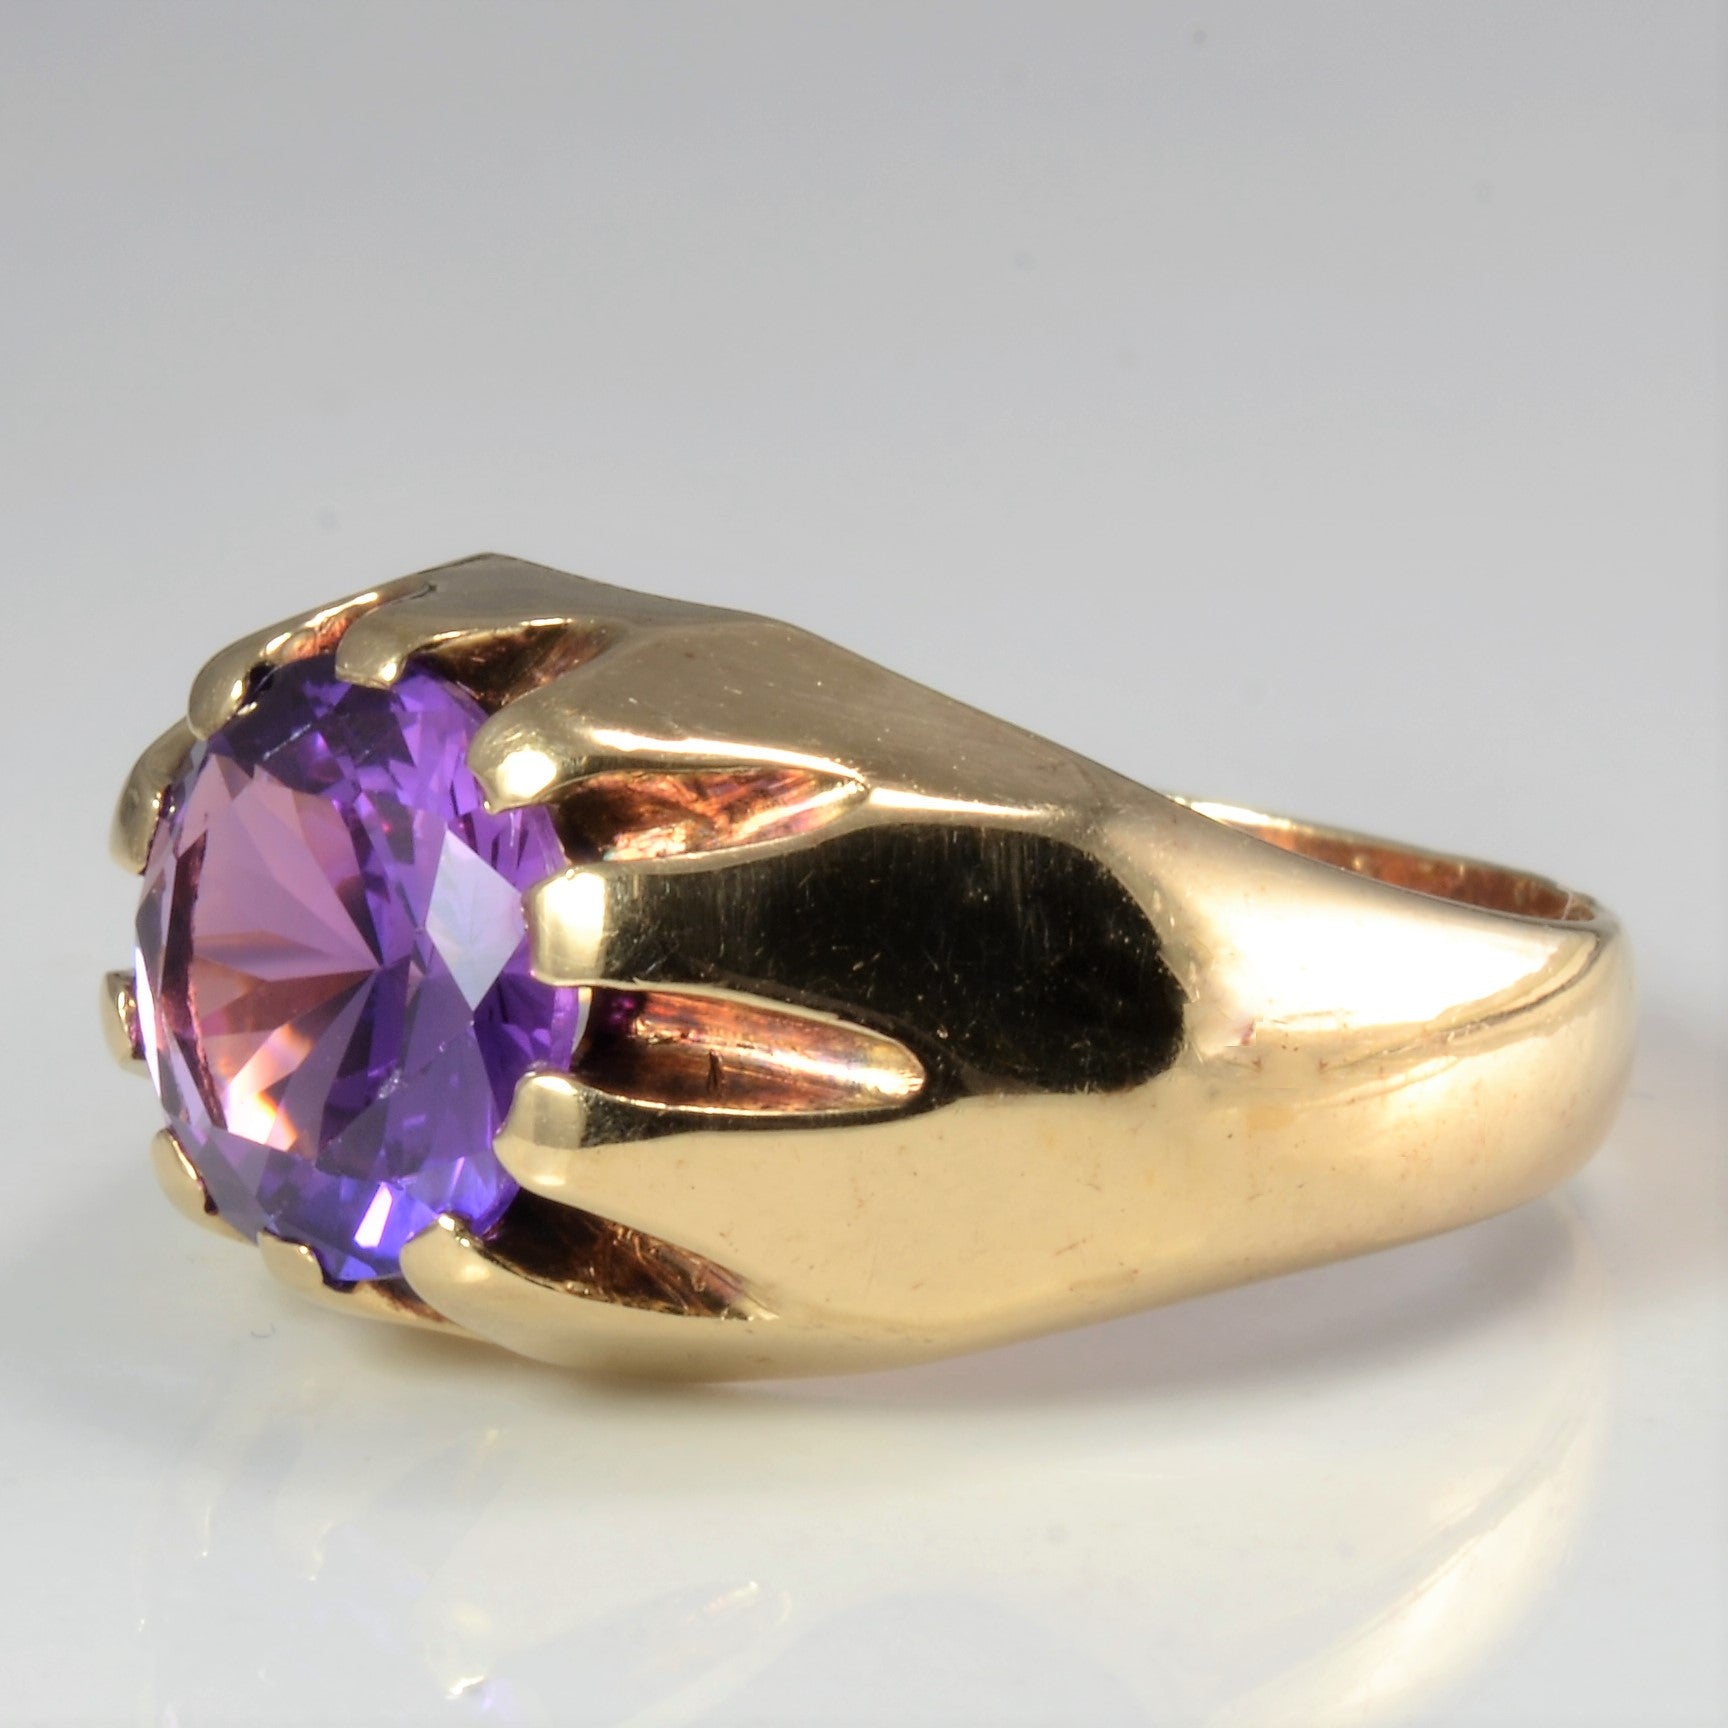 Solitaire Amethyst Ring | SZ 10.25 |